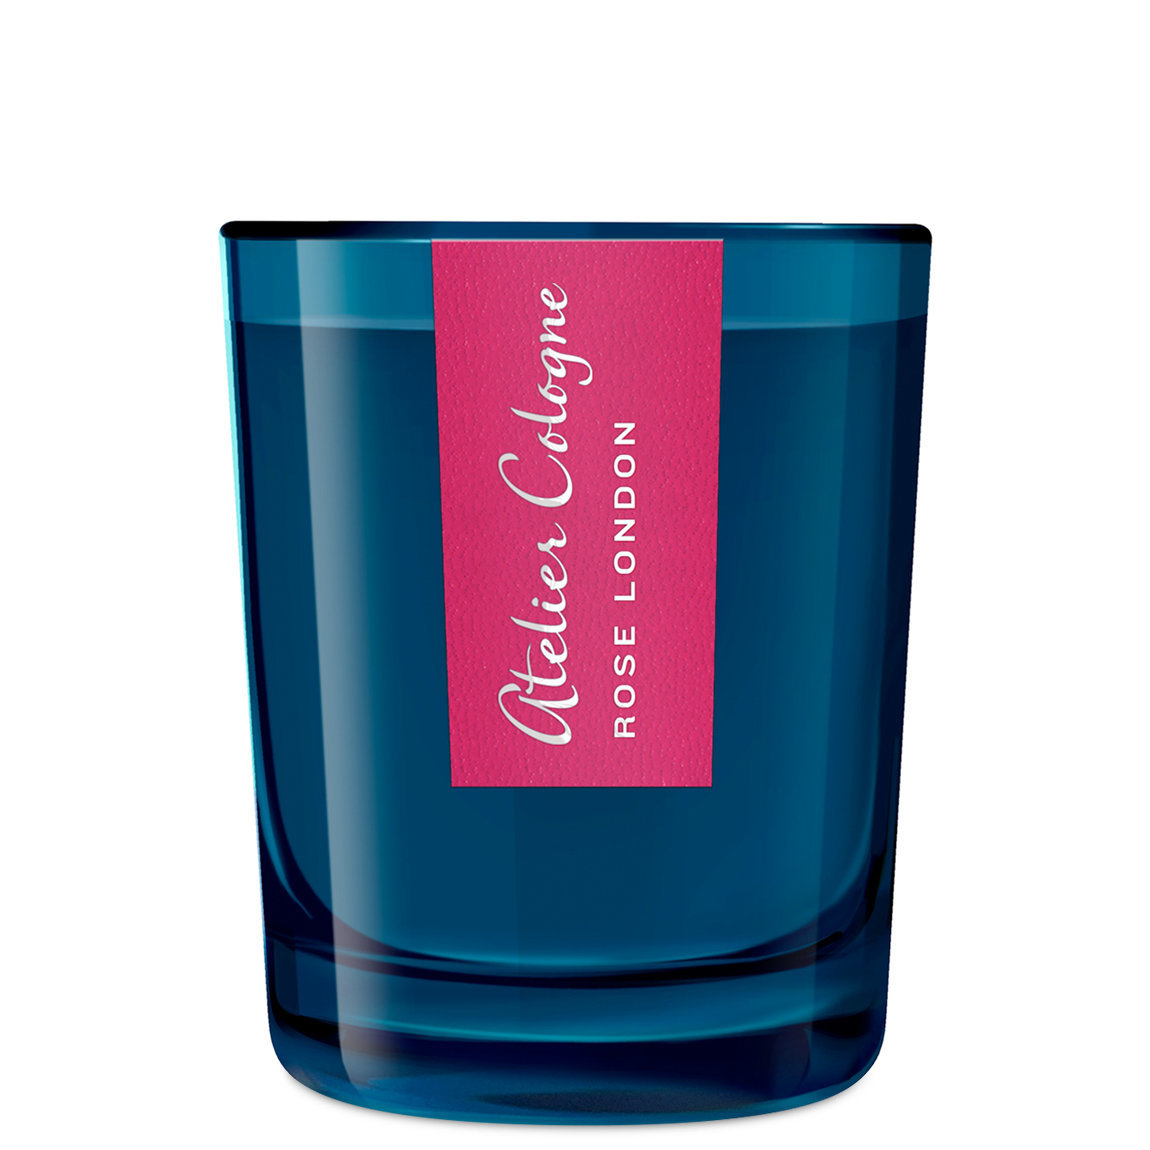 Atelier Cologne Rose London Candle alternative view 1 - product swatch.